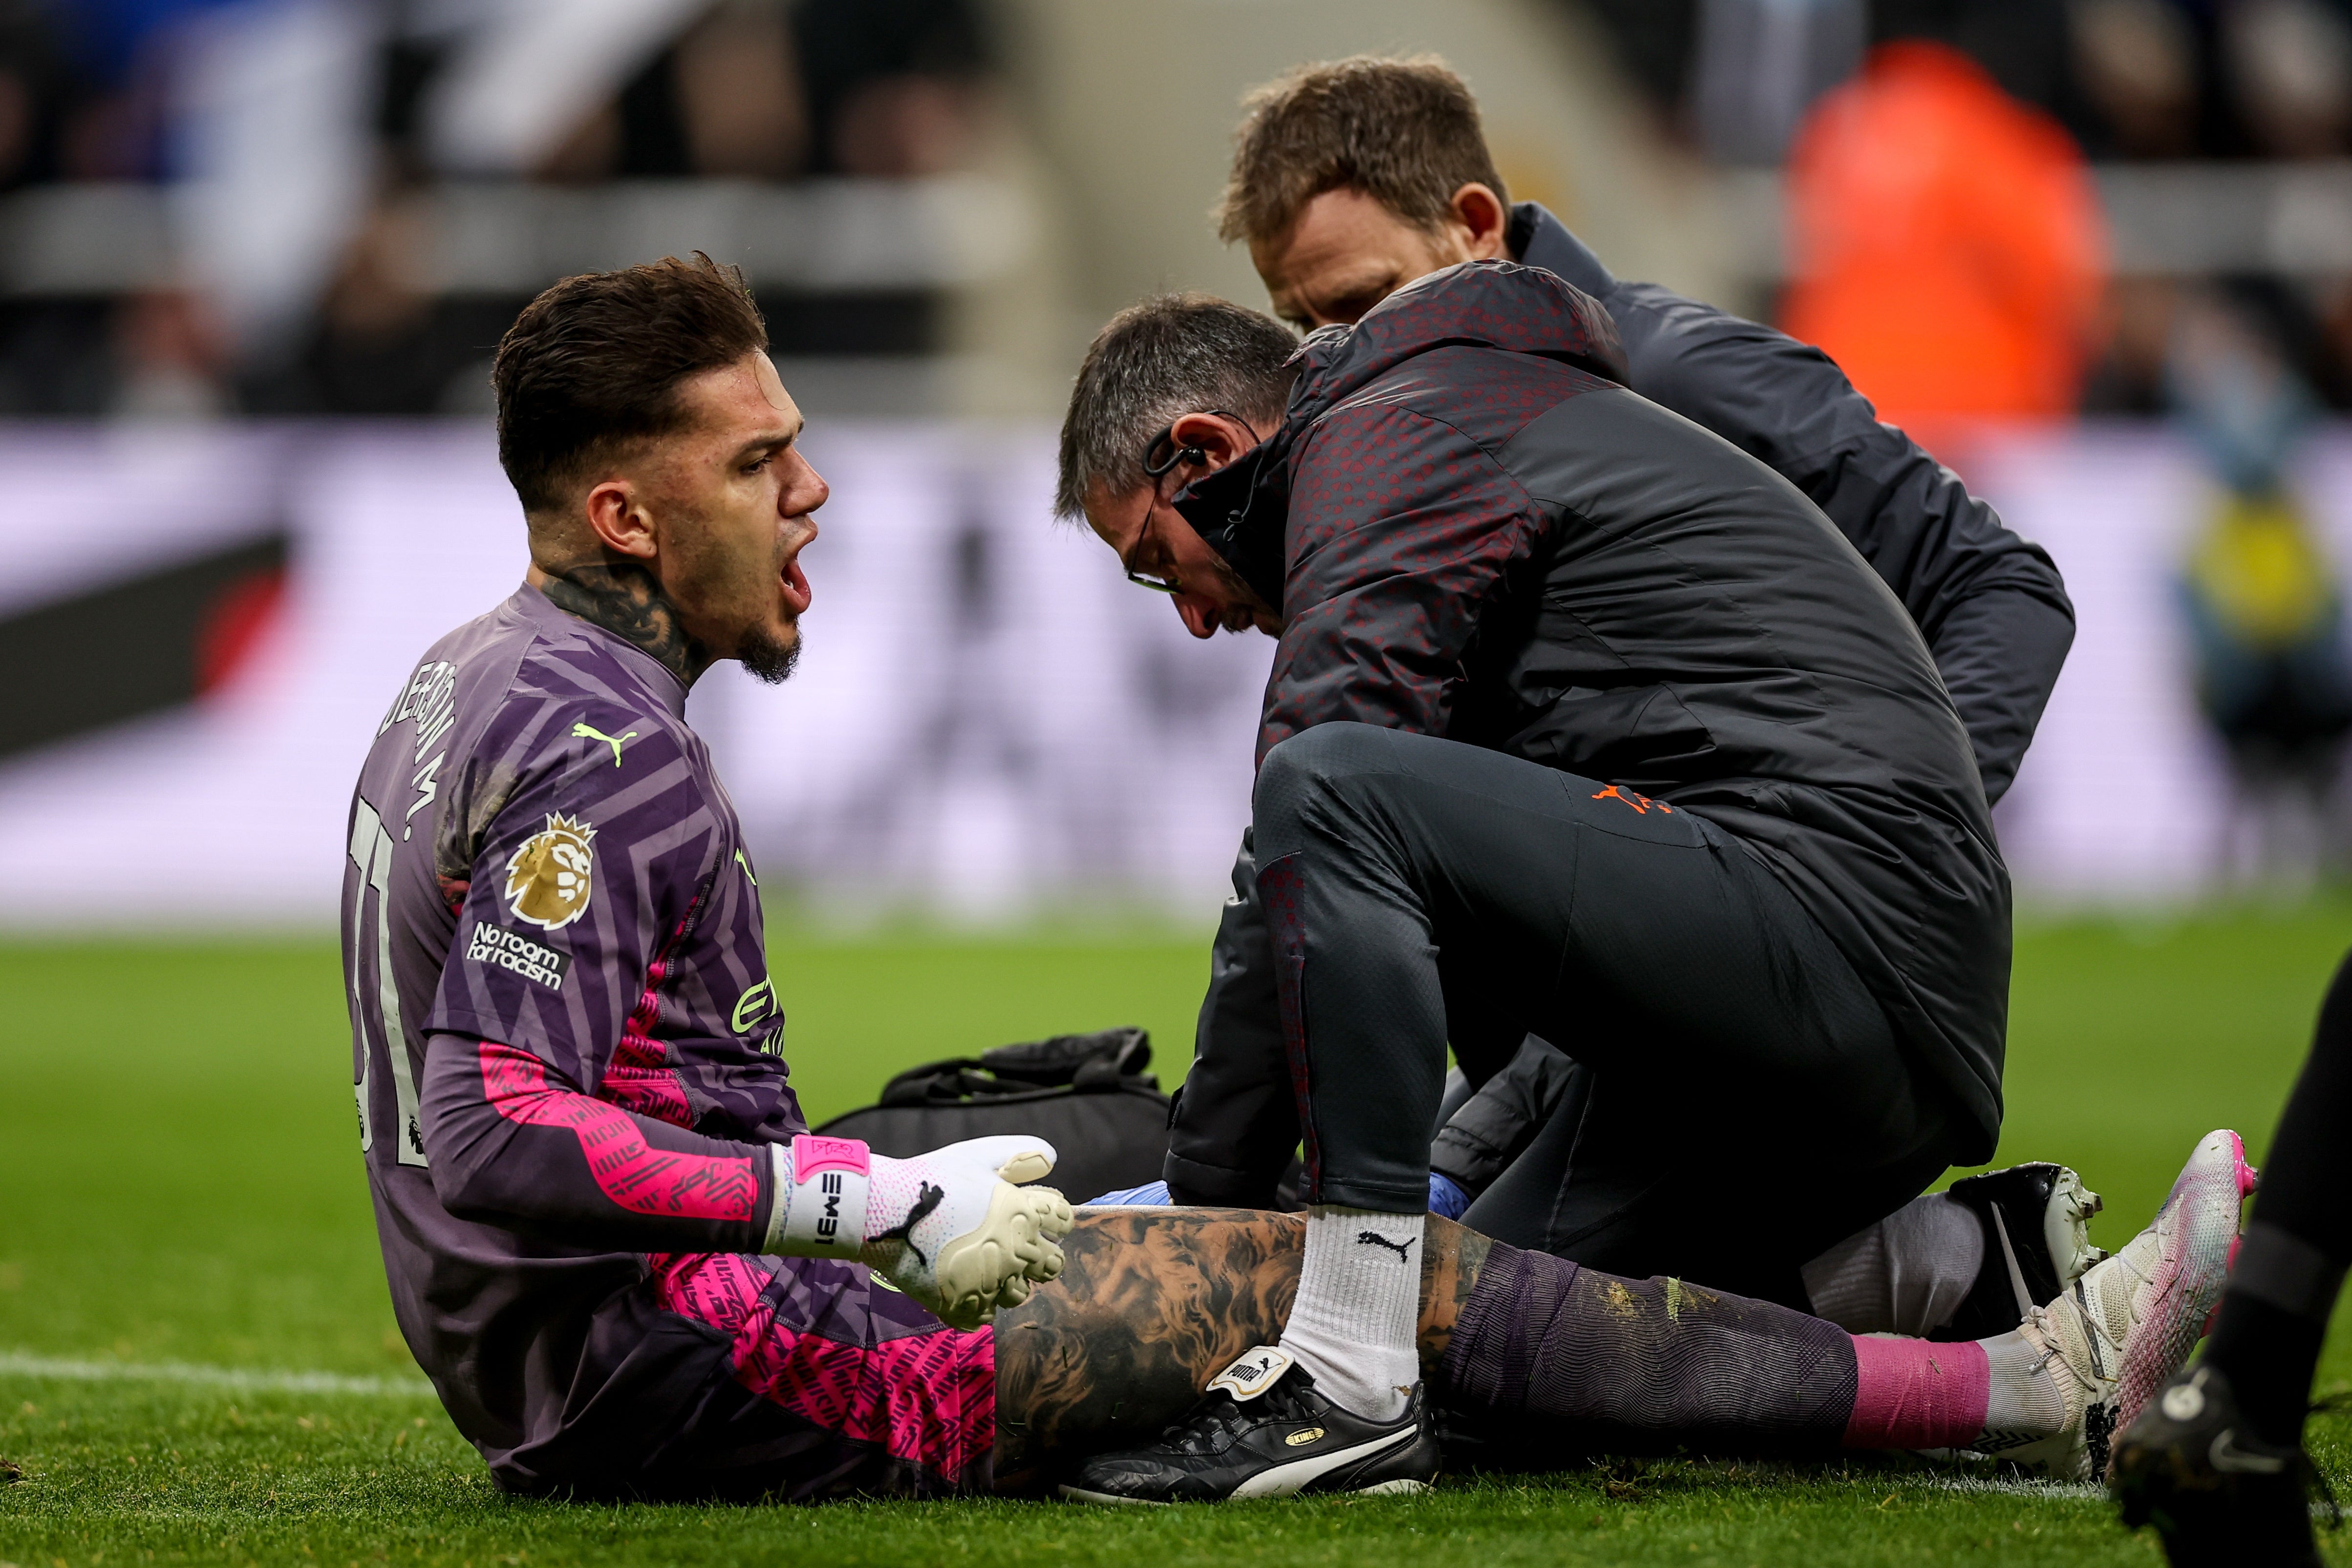 Ederson appeared to be in sconsiderable pain as he left the field